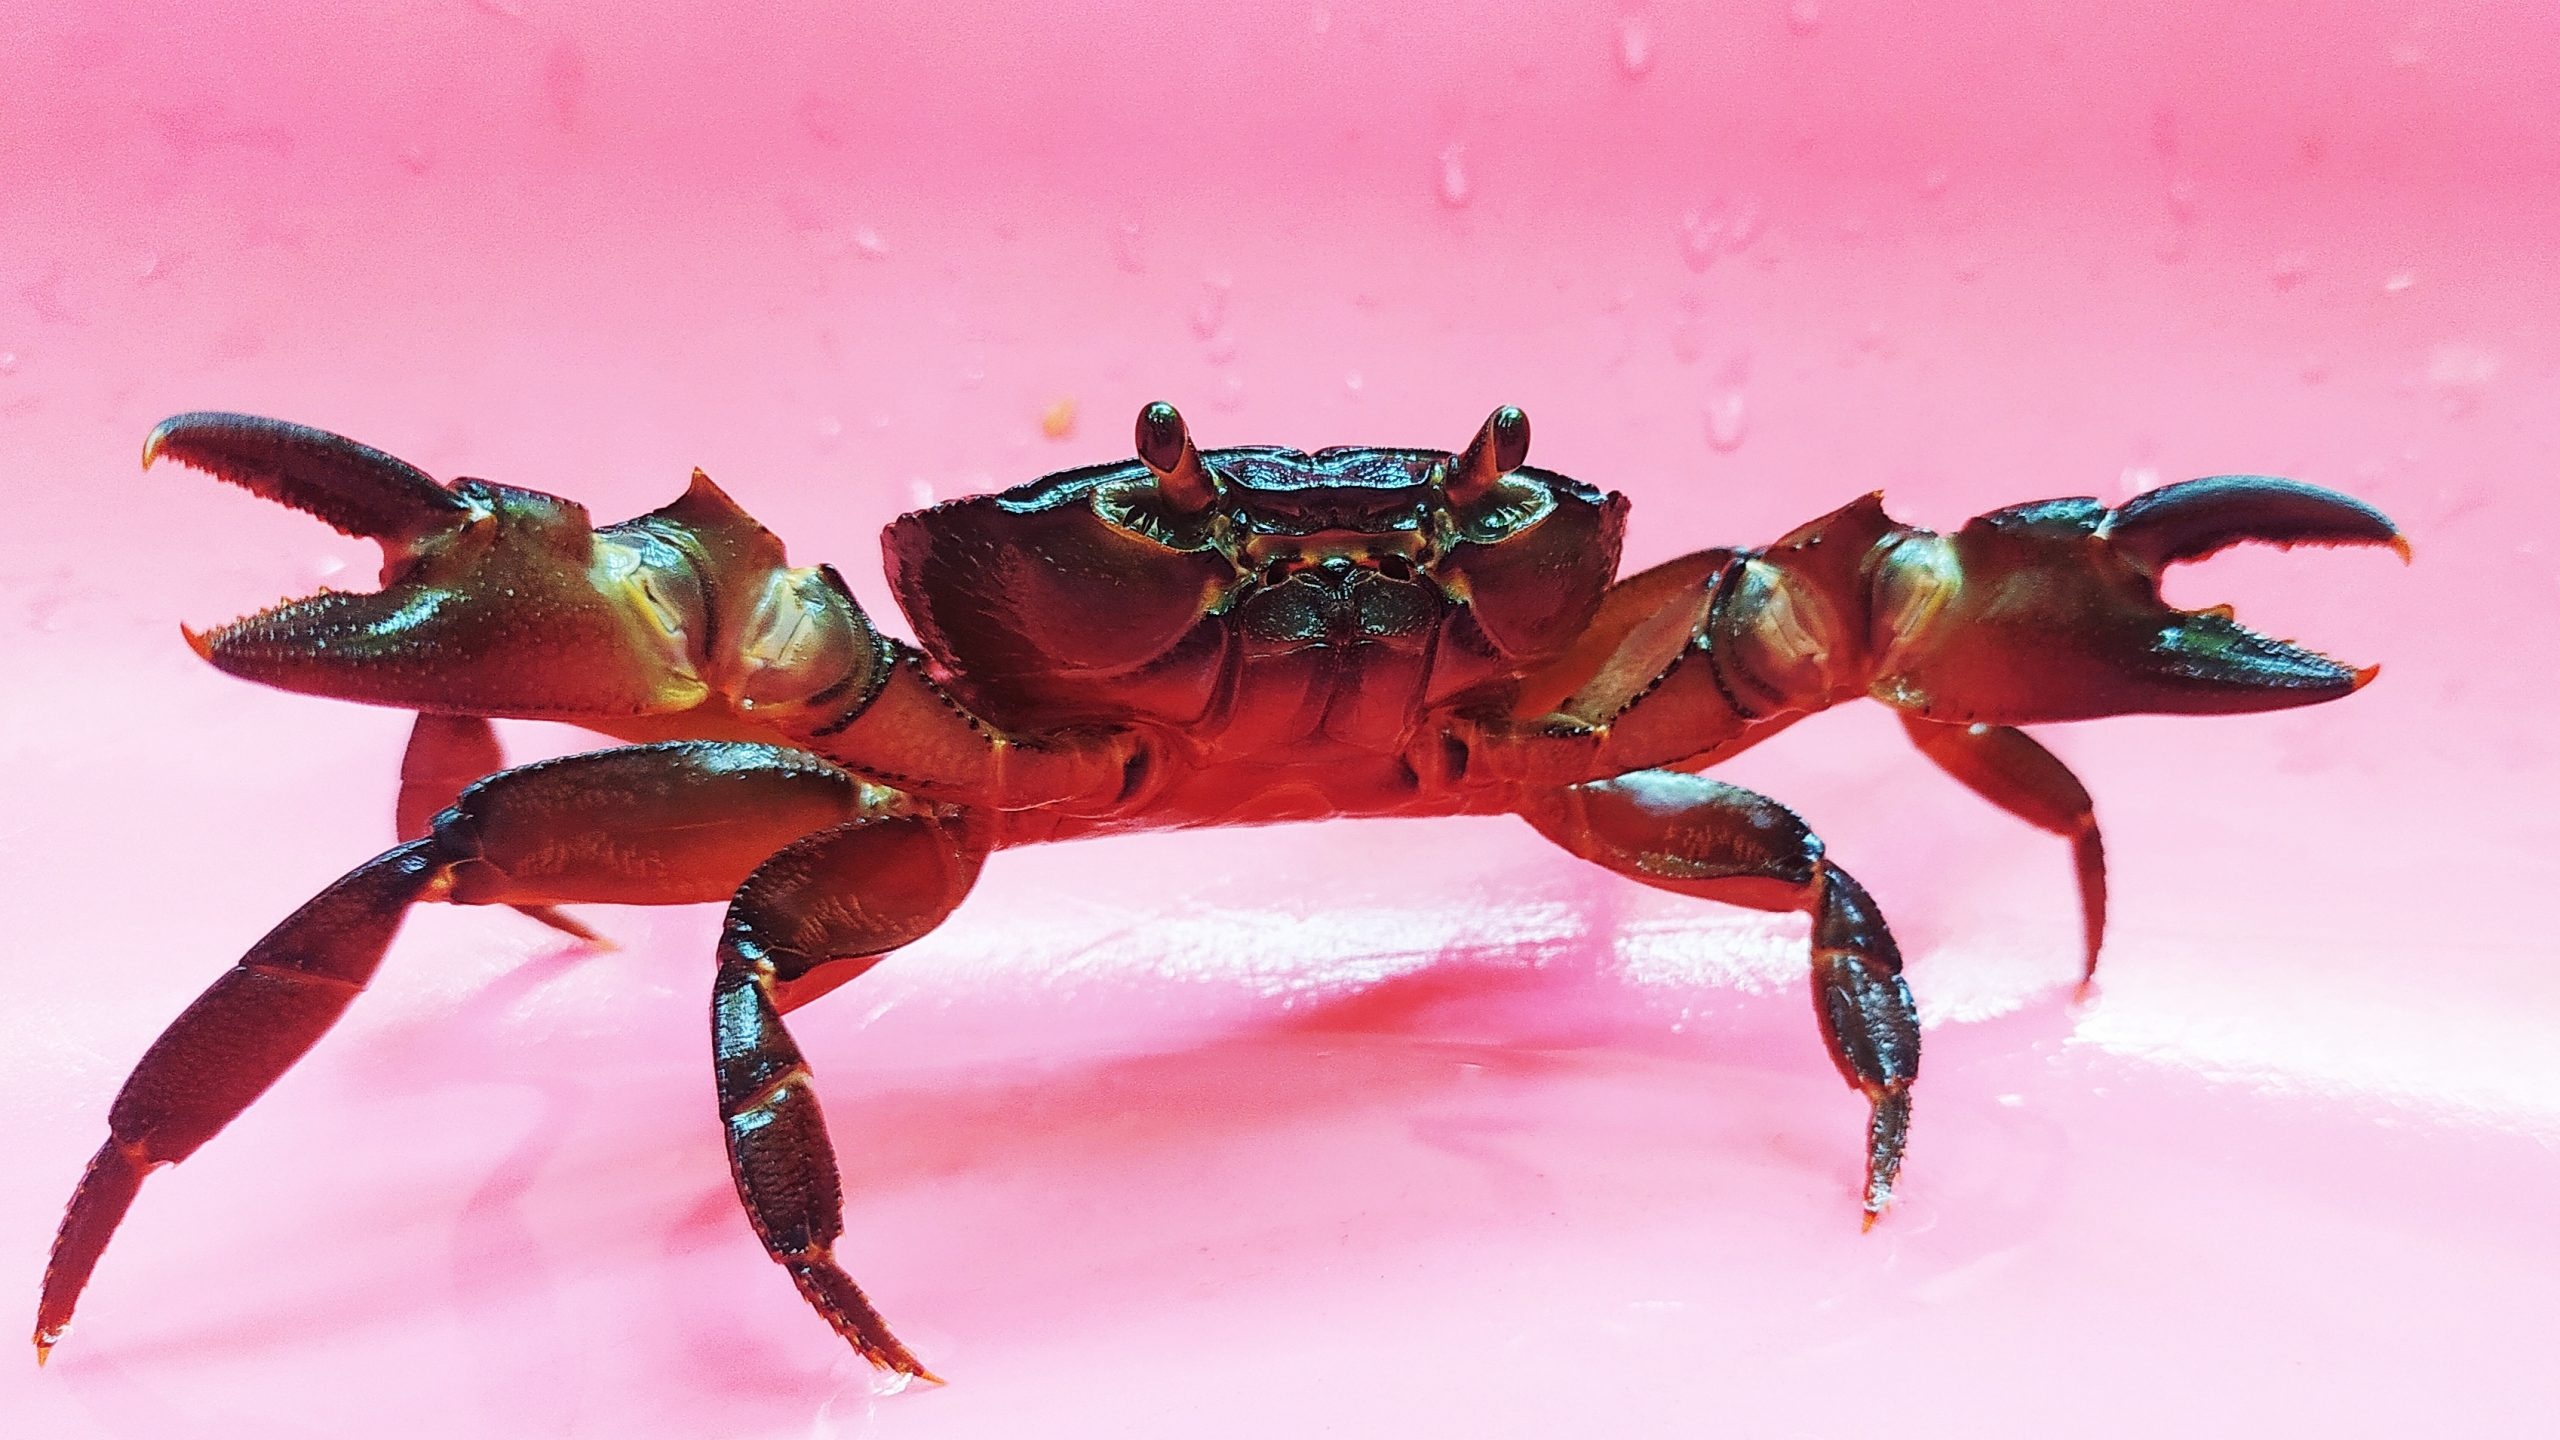 Crab: Start growing their new shells even before they molt. 2560x1440 HD Wallpaper.